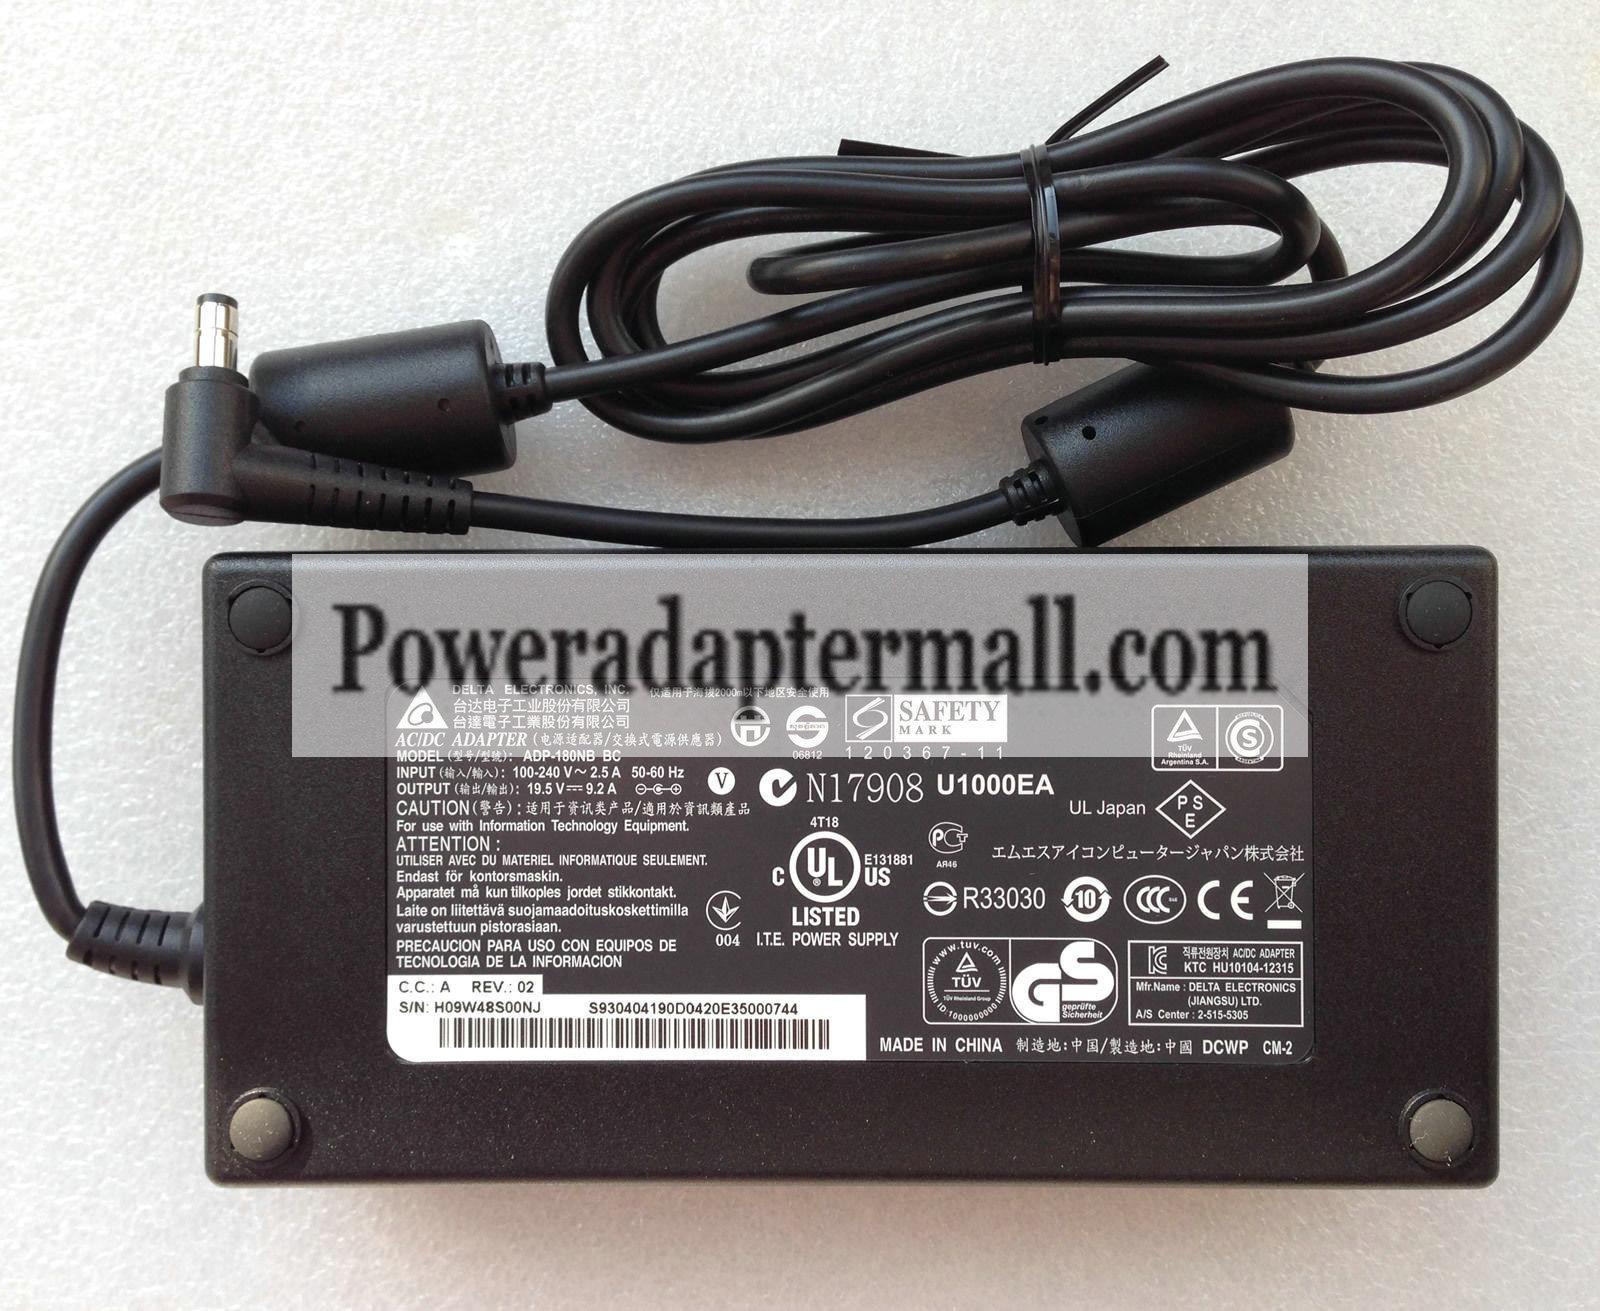 19.5V 9.2A Clevo ADP-180NB BC S93-0404190-D04 AC Adapter